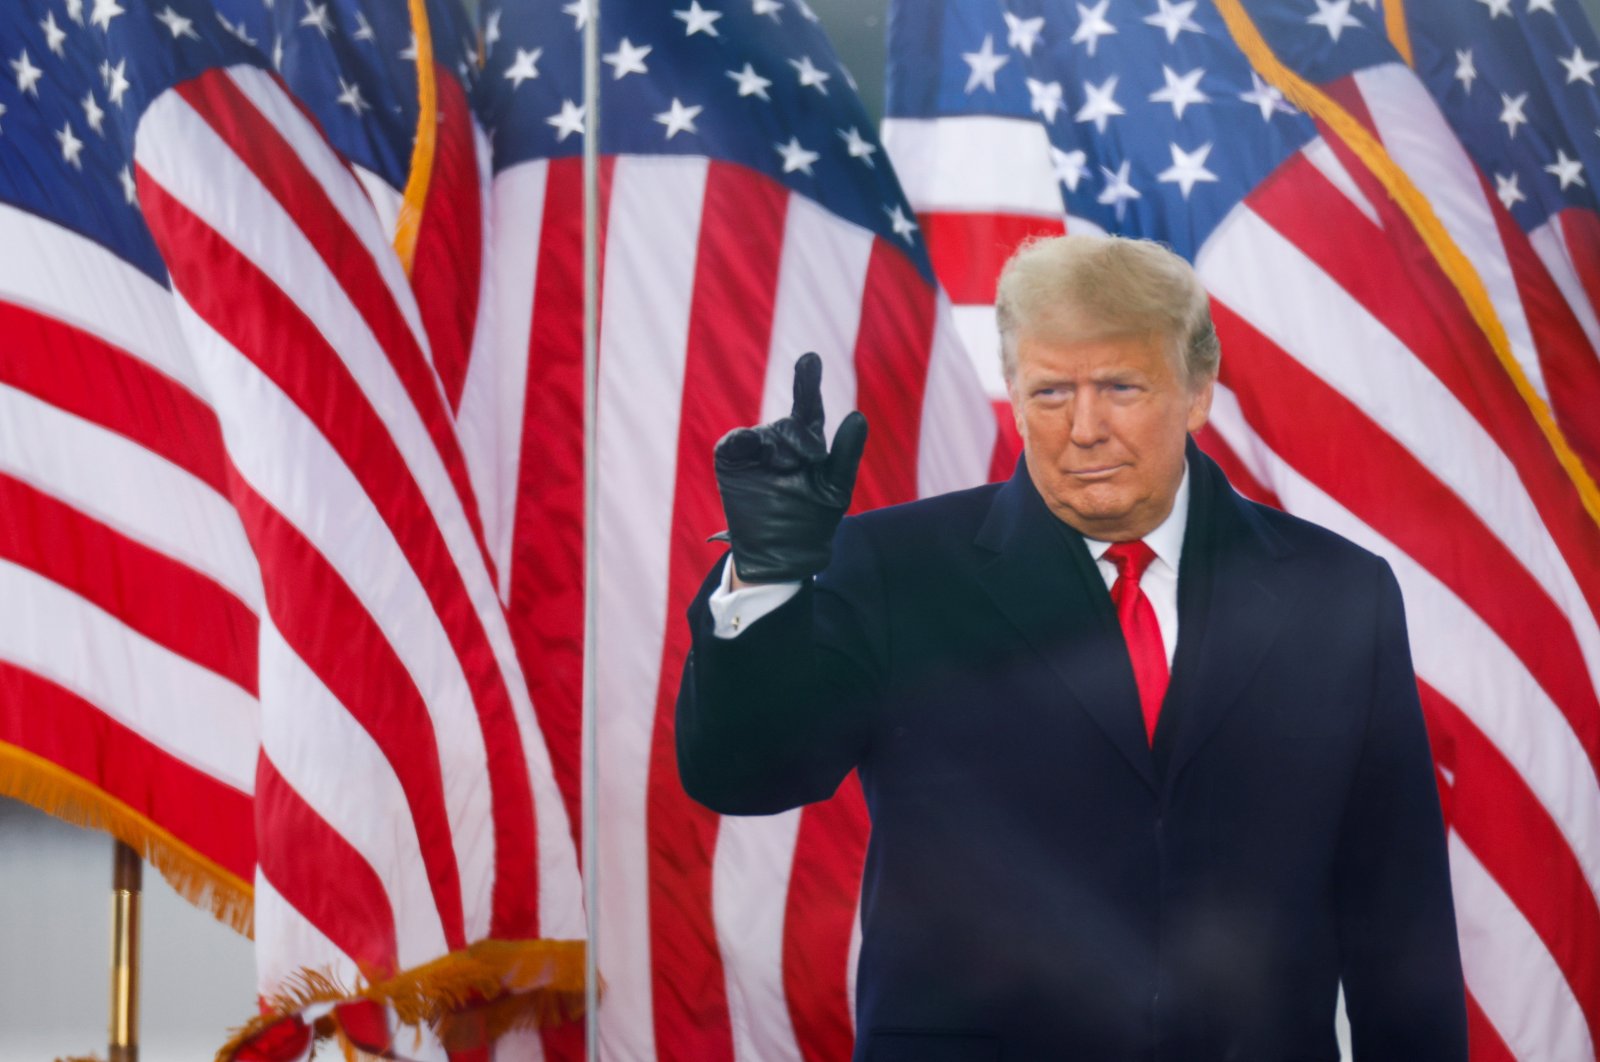 U.S. President Donald Trump gestures during a rally to contest the certification of the 2020 U.S. presidential election results by the U.S. Congress, in Washington, D.C., Jan. 6, 2021. (Reuters Photo)